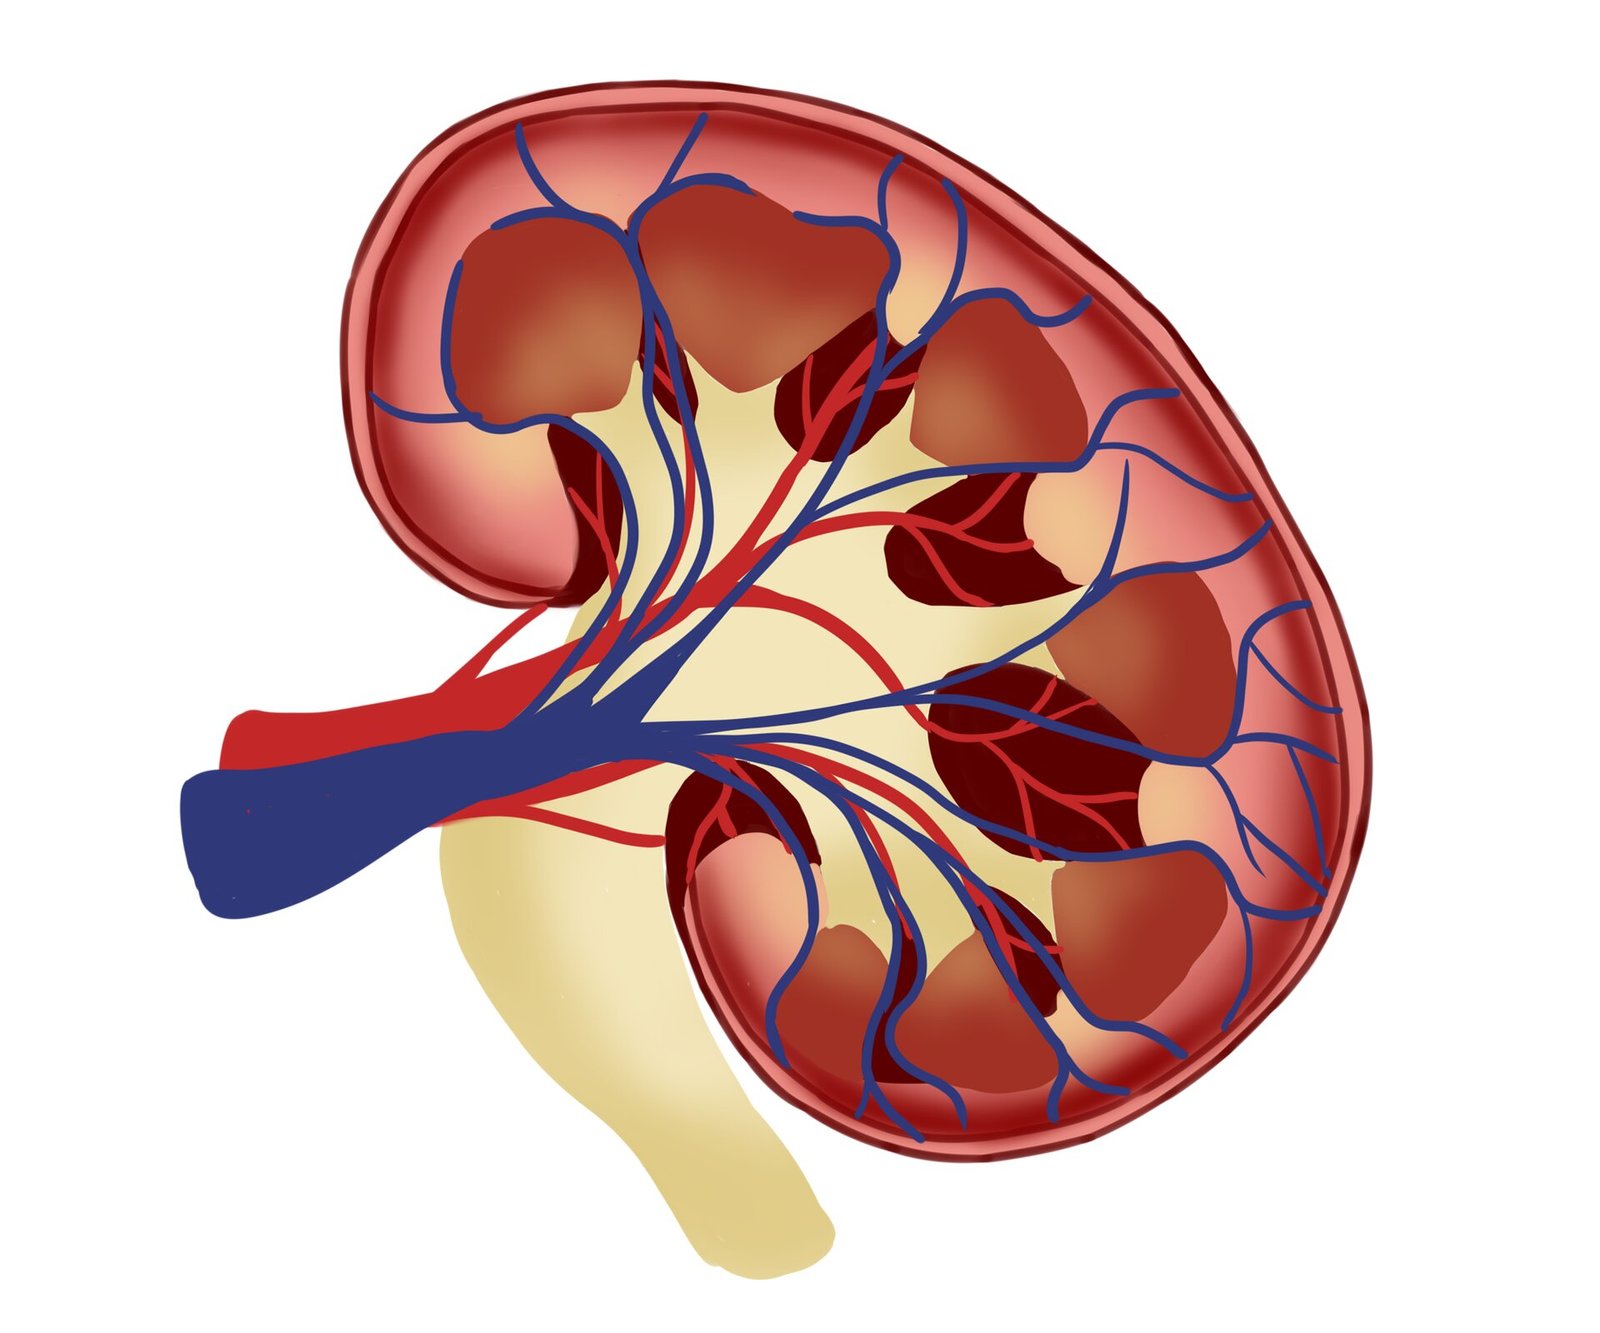 New technique detects novel biomarkers for kidney diseases with nephrotic syndrome